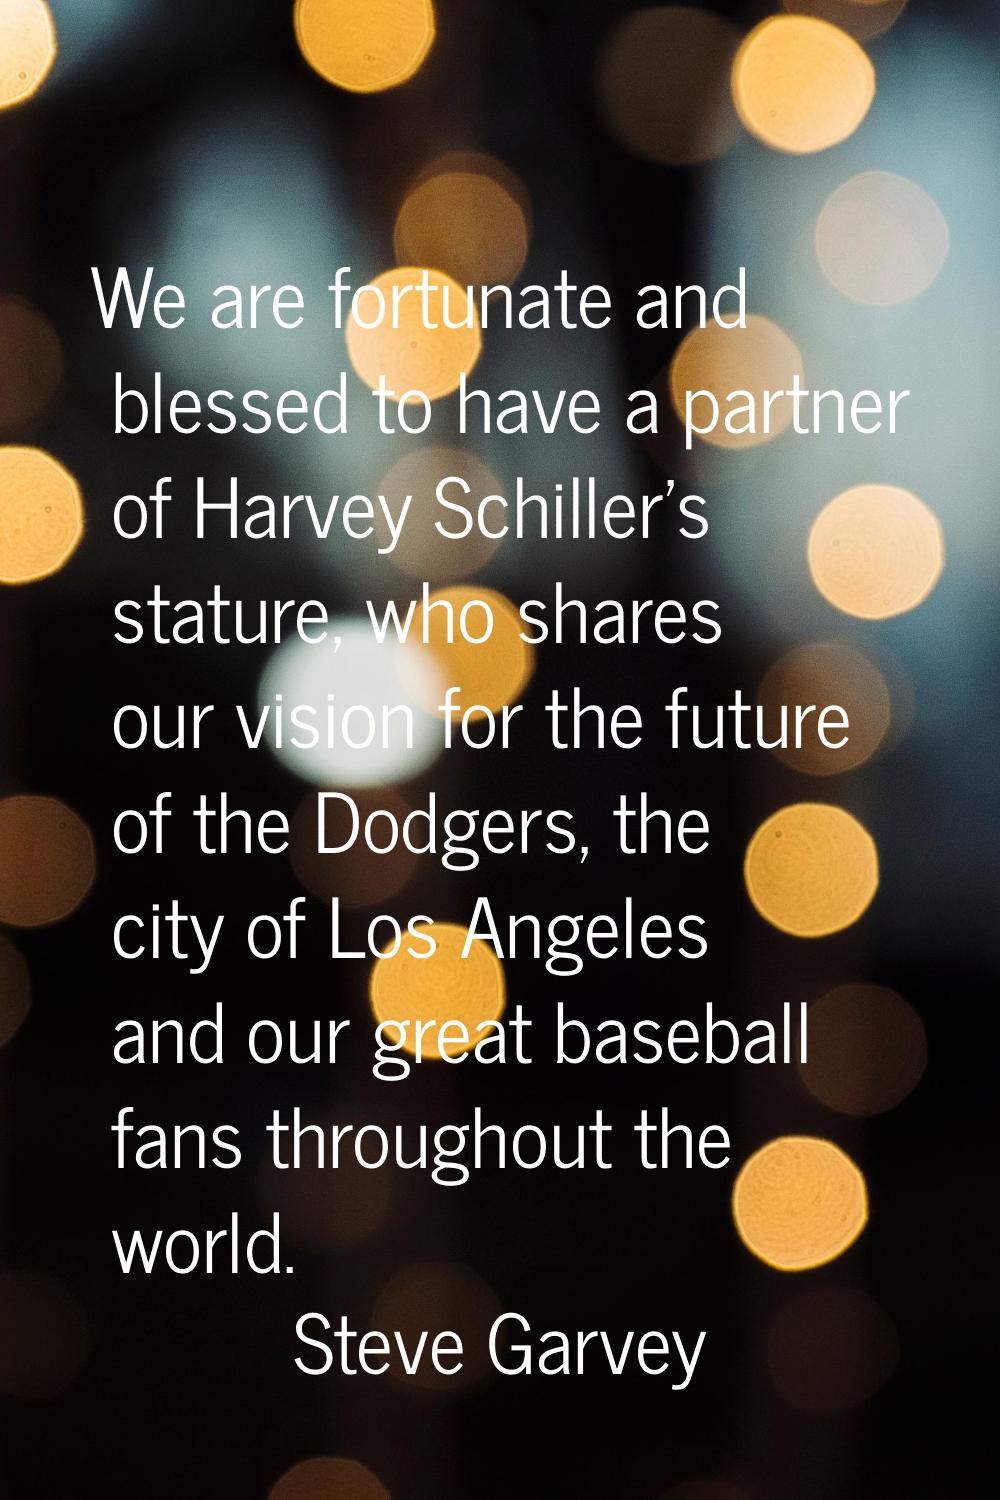 We are fortunate and blessed to have a partner of Harvey Schiller's stature, who shares our vision 